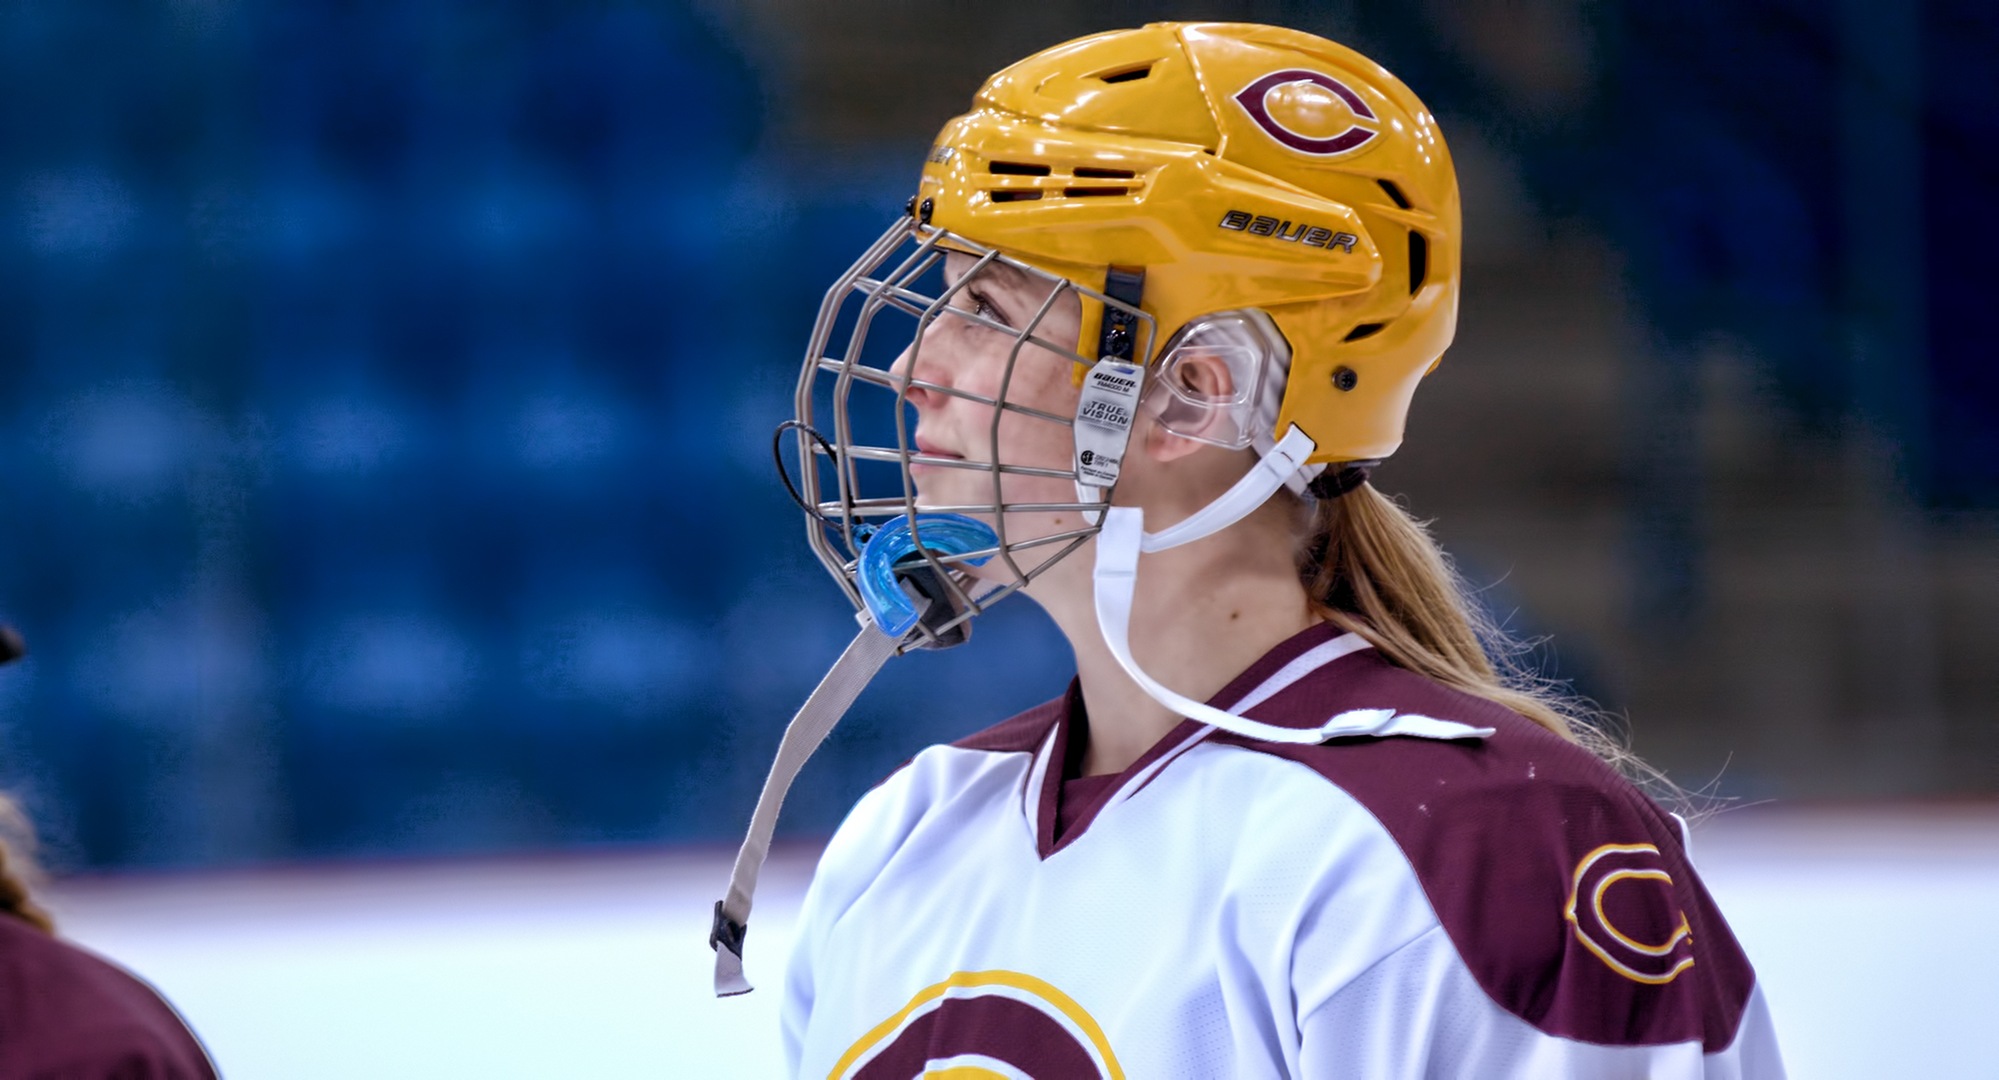 Senior Emily Goff had a pair of goals in the Cobbers' 3-3 overtime tie in the series opener at St. Thomas.